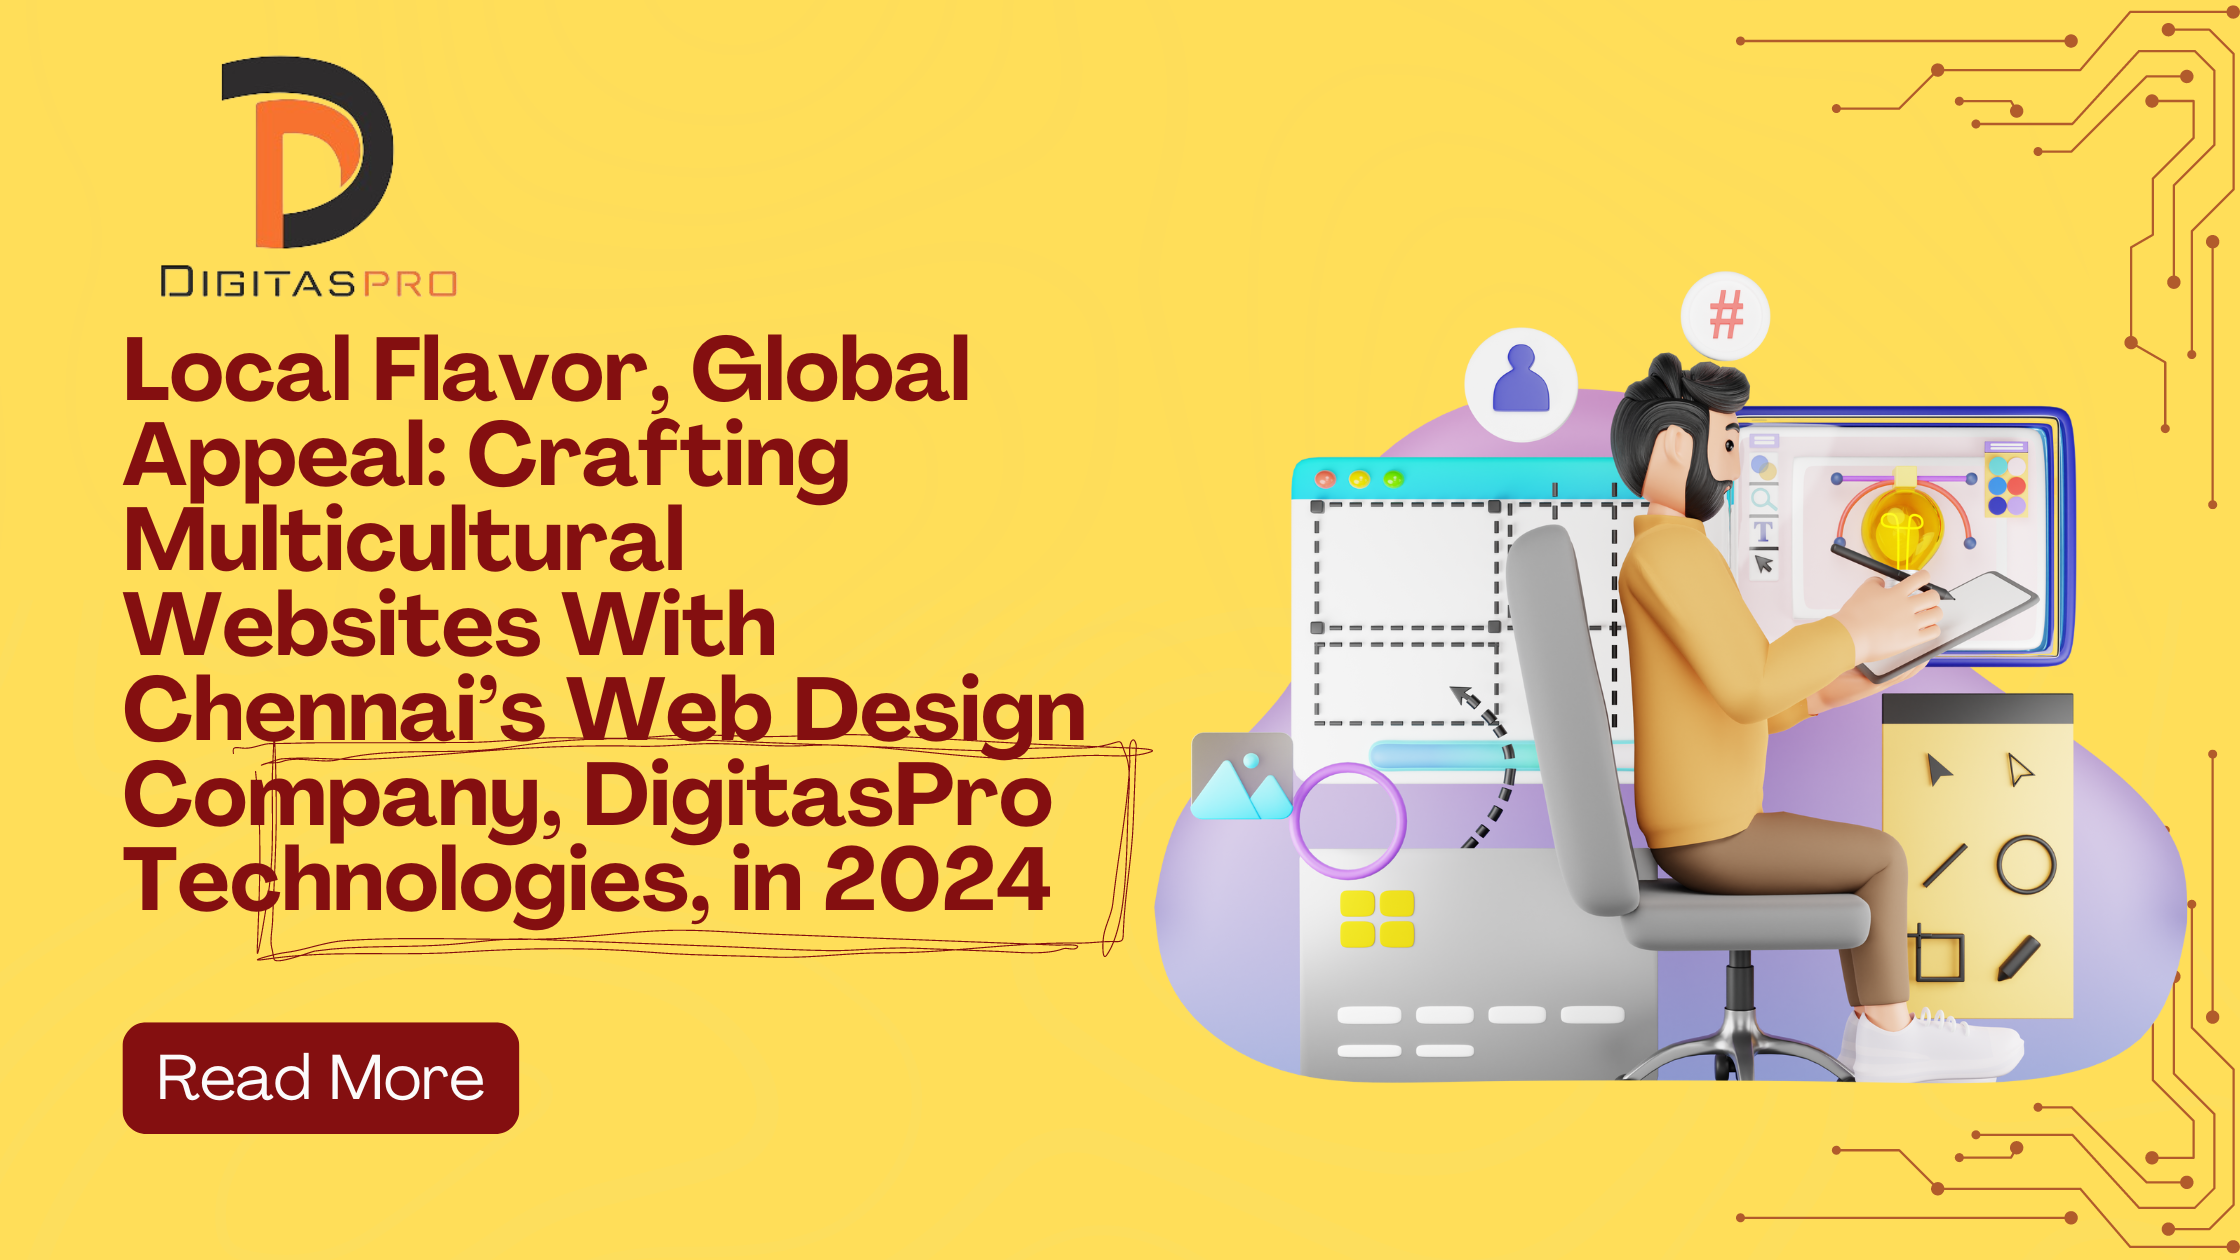 Local Flavor, Global Appeal: Crafting Multicultural Websites With Chennai’s Web Design Company, DigitasPro Technologies, in 2024